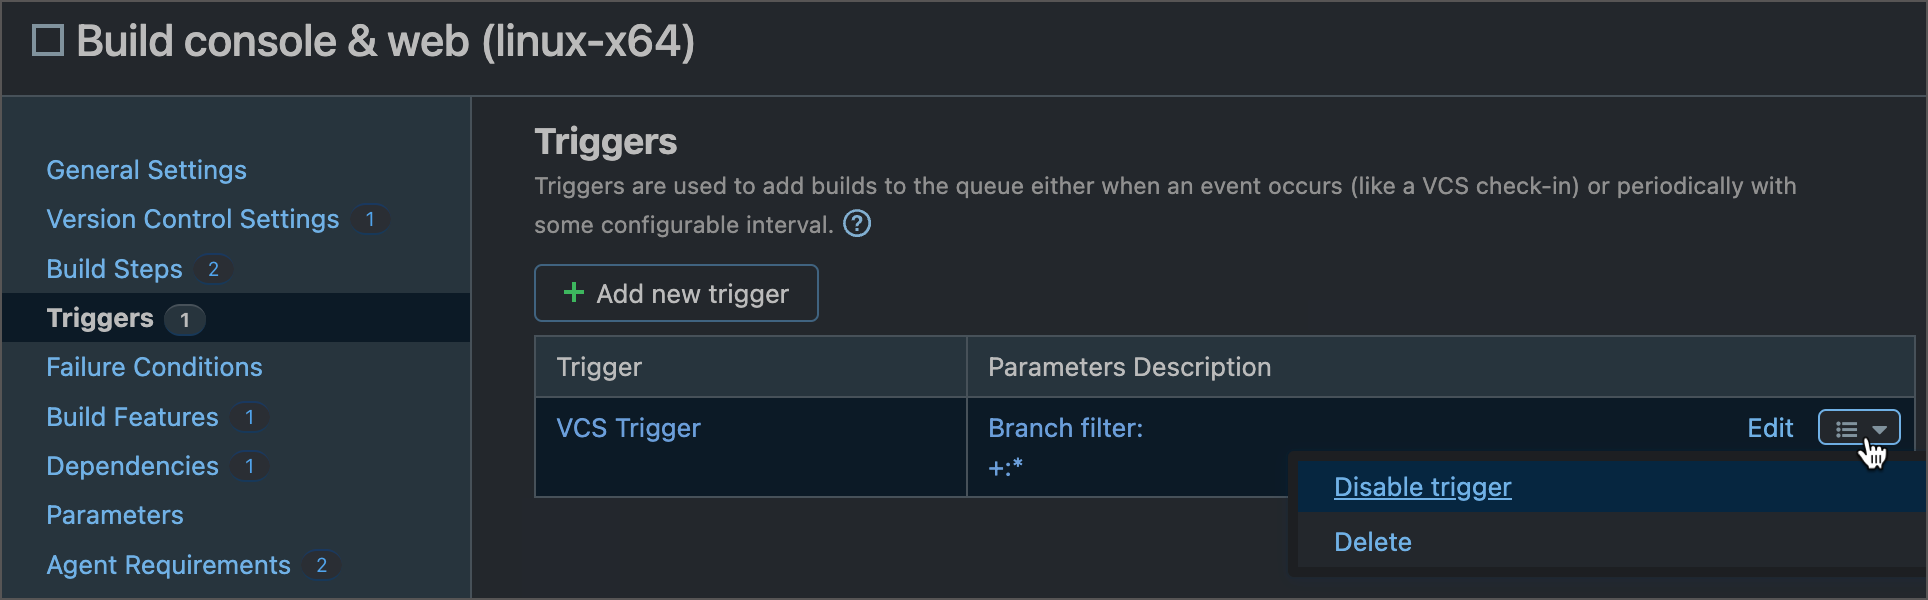 Remove or disable triggers